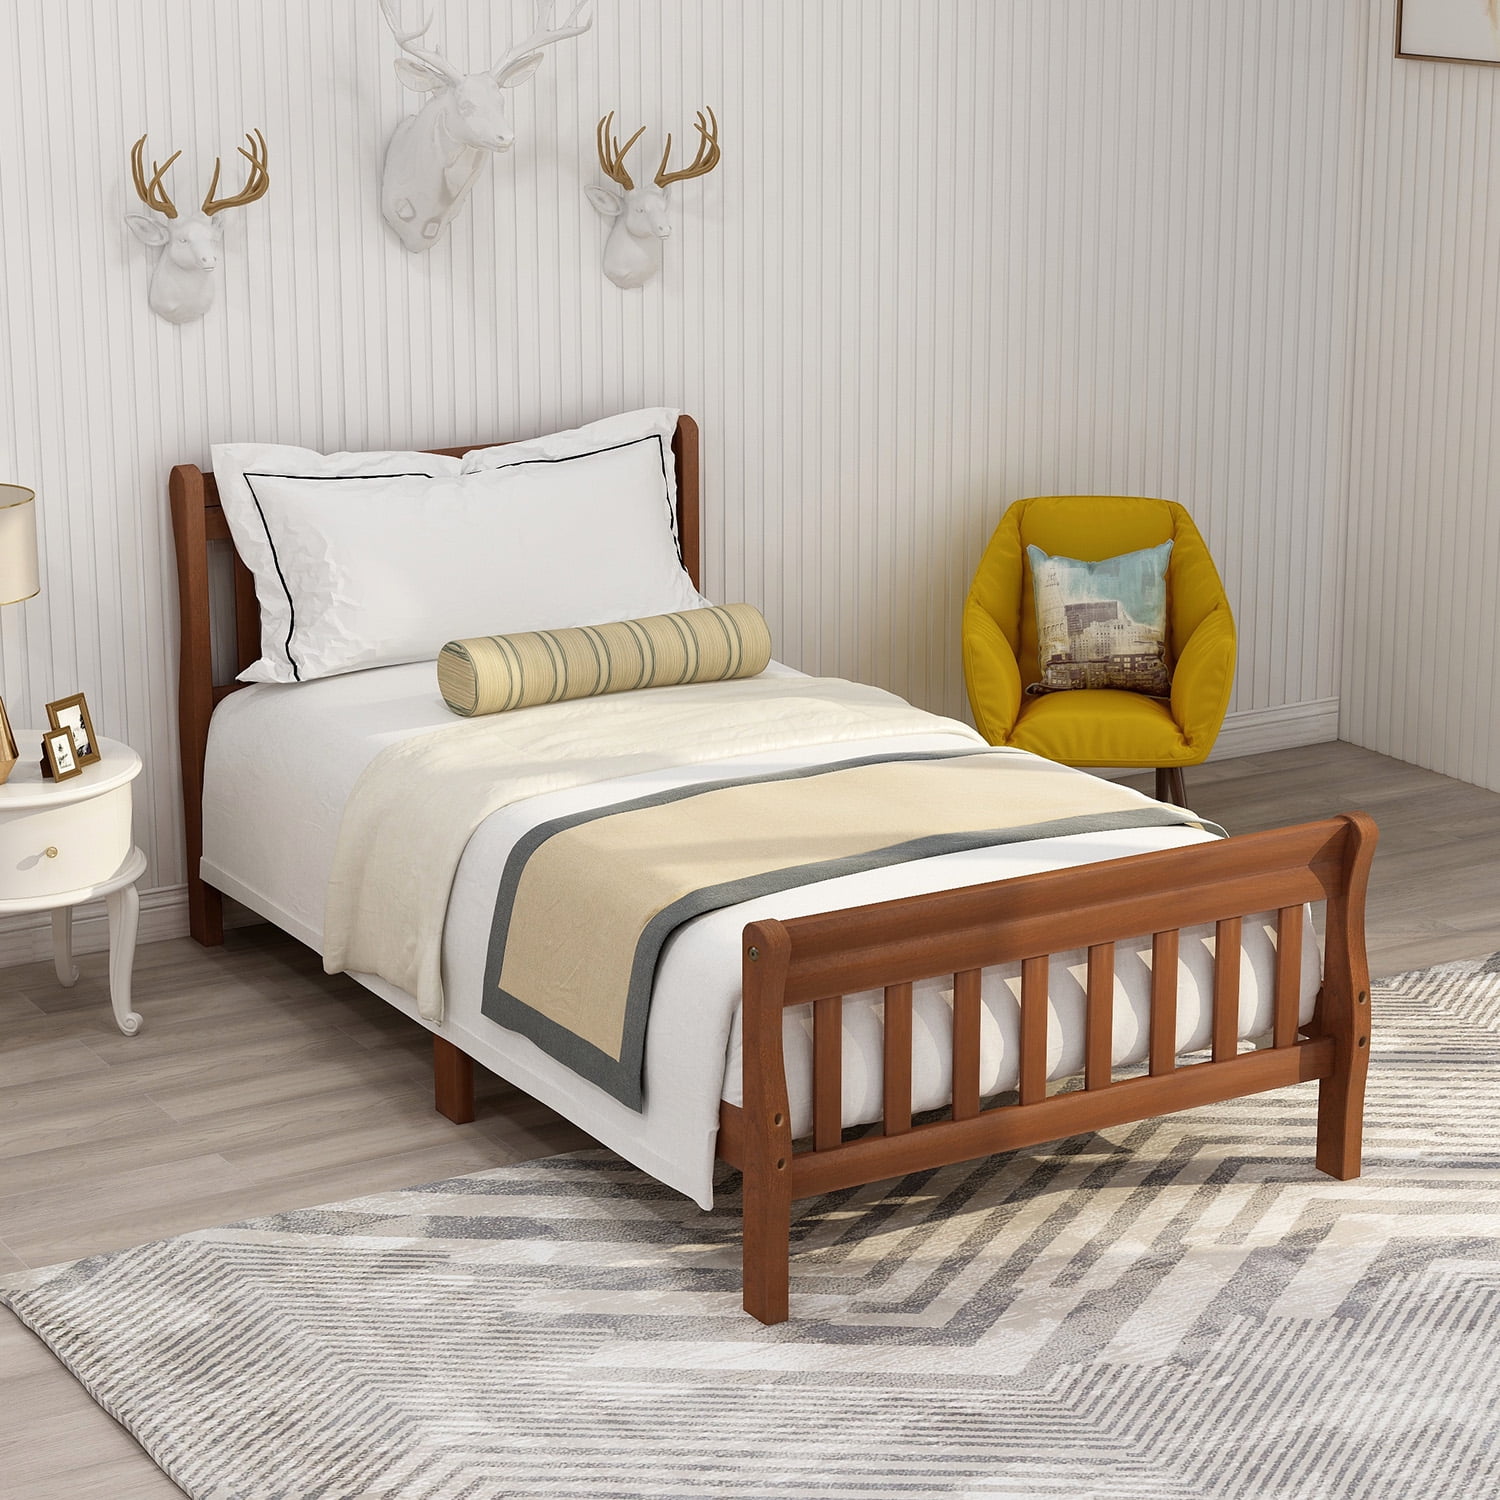 twin size bed frame for boy